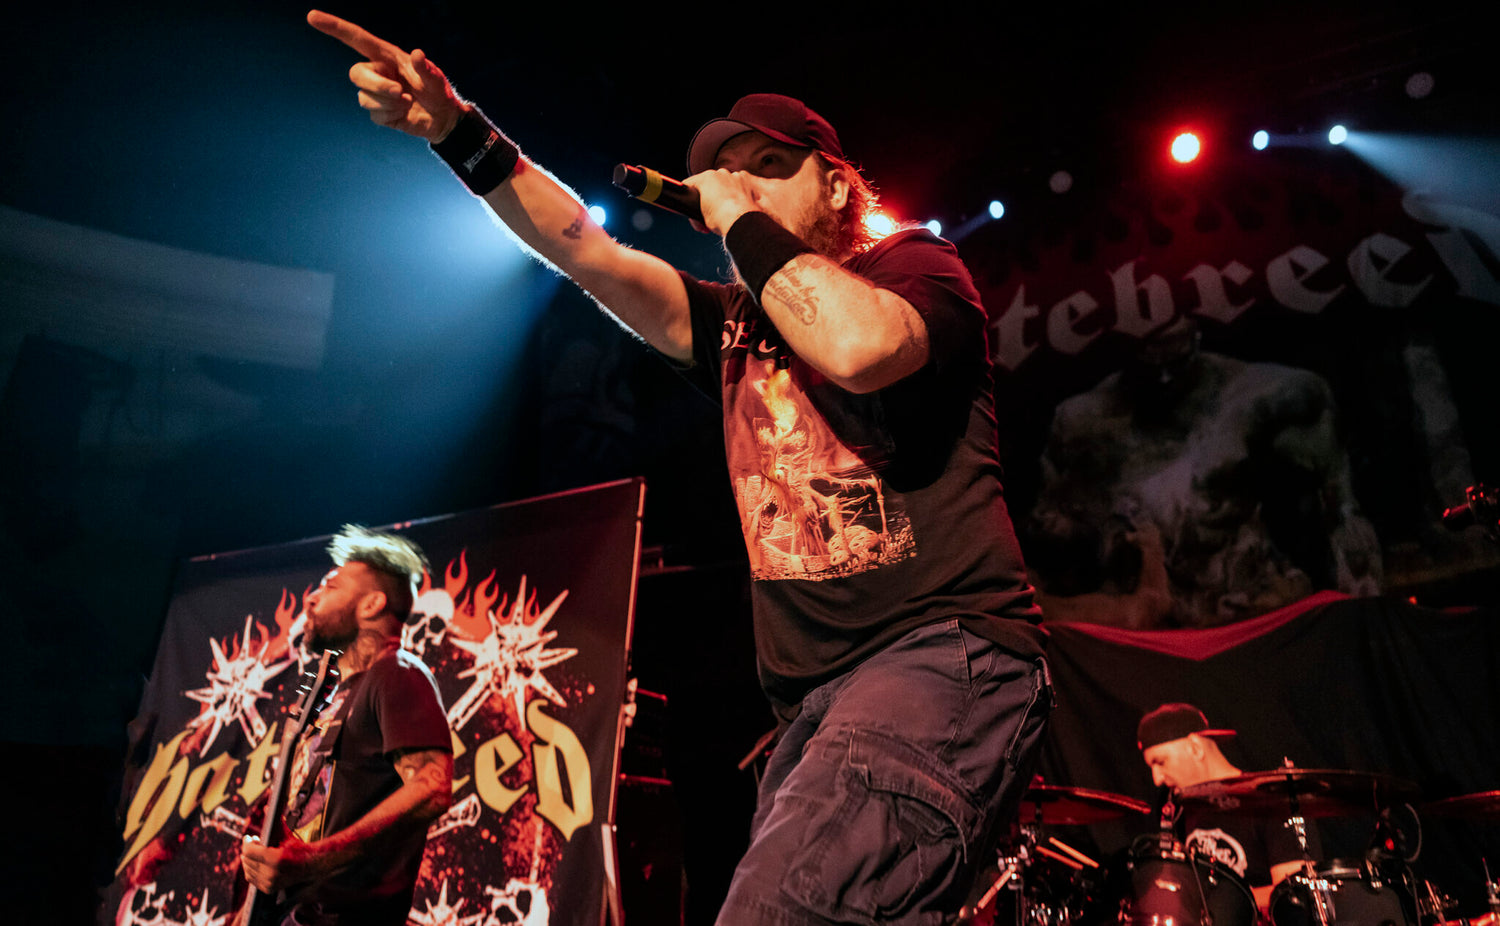 Hatebreed Celebrate "20 Years of Brutality" With US Tour